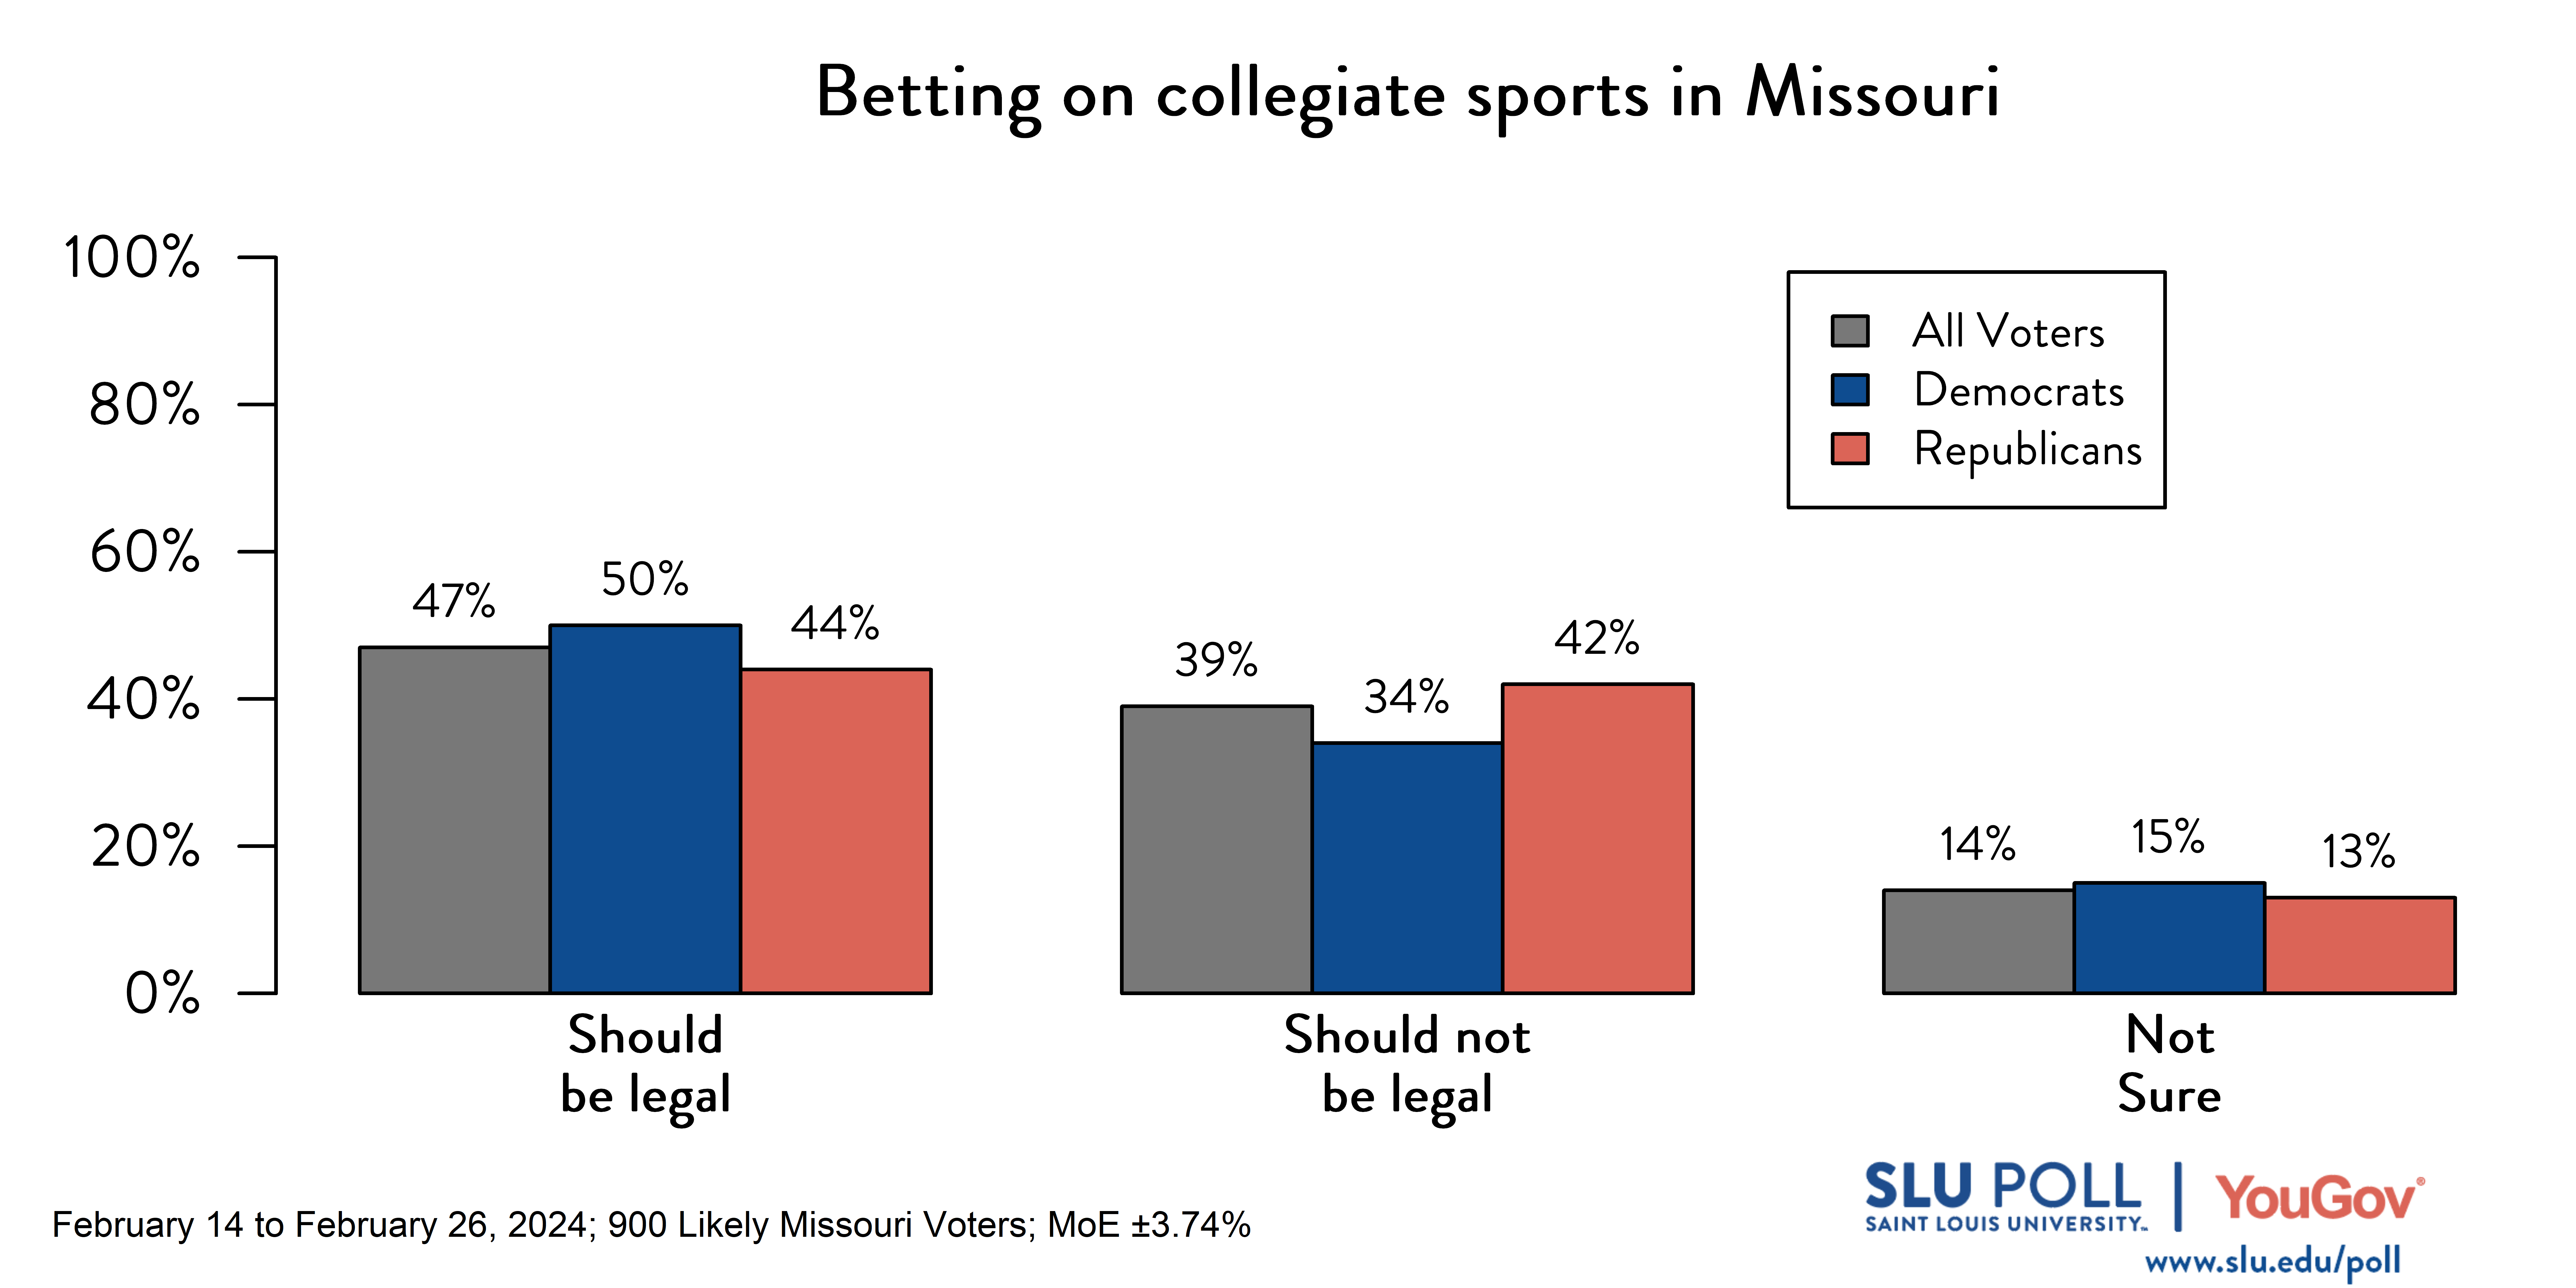 Likely voters' responses to 'Do you think the following should be legal in the state of Missouri for those who are 21 years old or older…Betting on collegiate sports?': 47% Should be legal, 39% Should not be legal, and 14% Not Sure. Democratic voters' responses: ' 50% Should be legal, 34% Should not be legal, and 15% Not Sure. Republican voters' responses:  44% Should be legal, 42% Should not be legal, and 13% Not Sure.